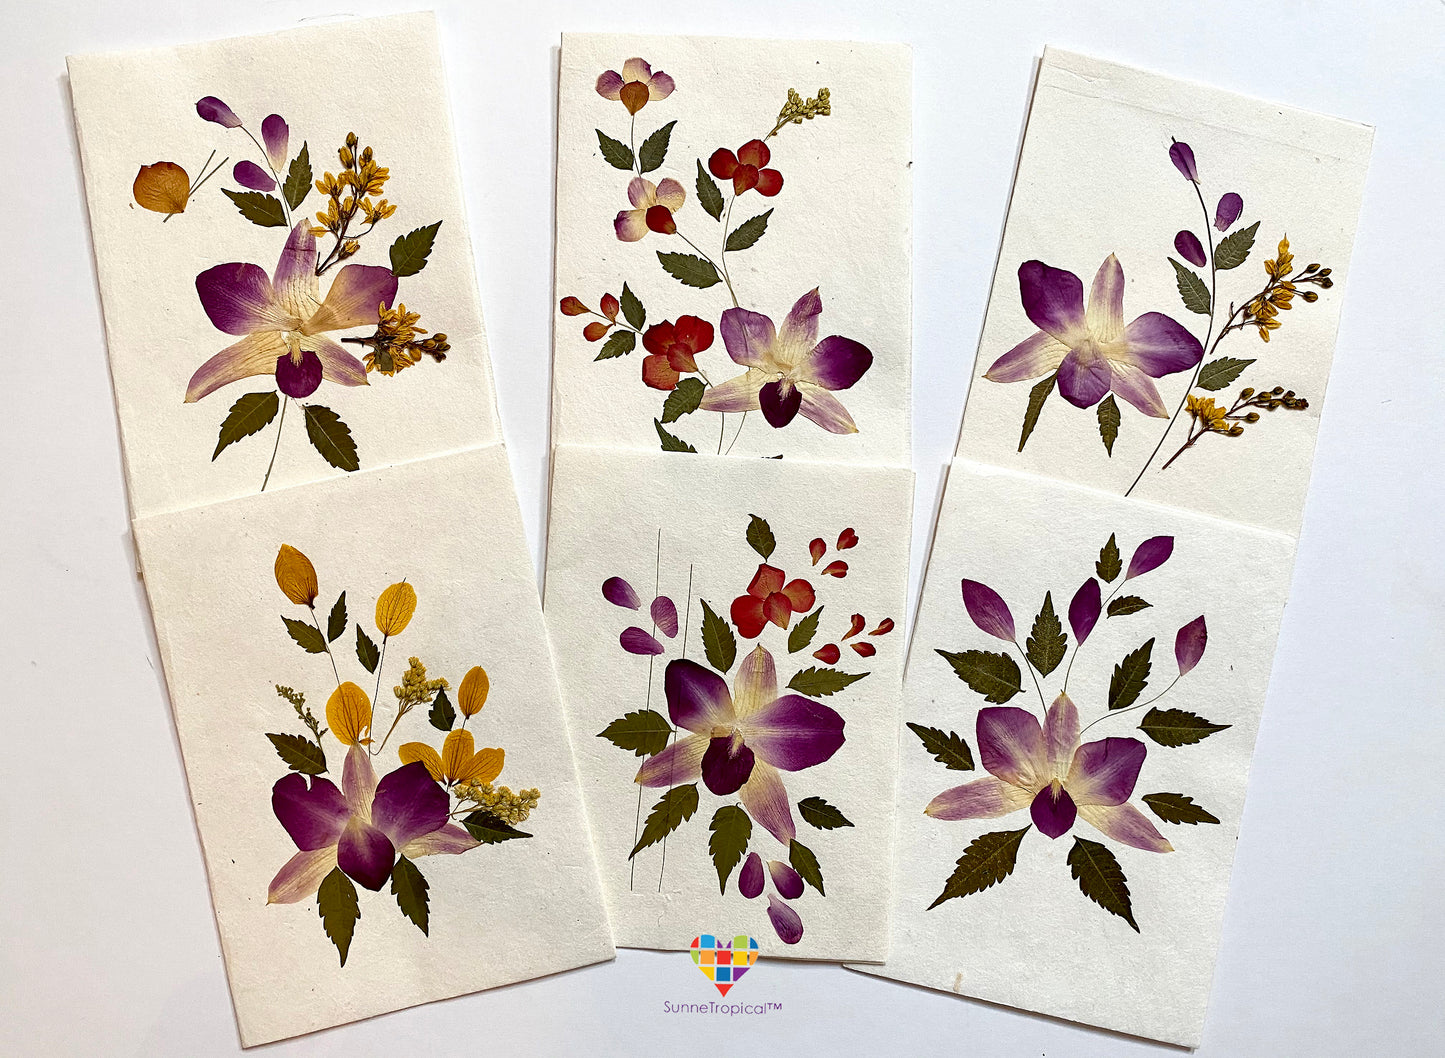 Handmade Cards 5x7 inch Real Dried Flowers Random Pack (3 Sonia Orchid)